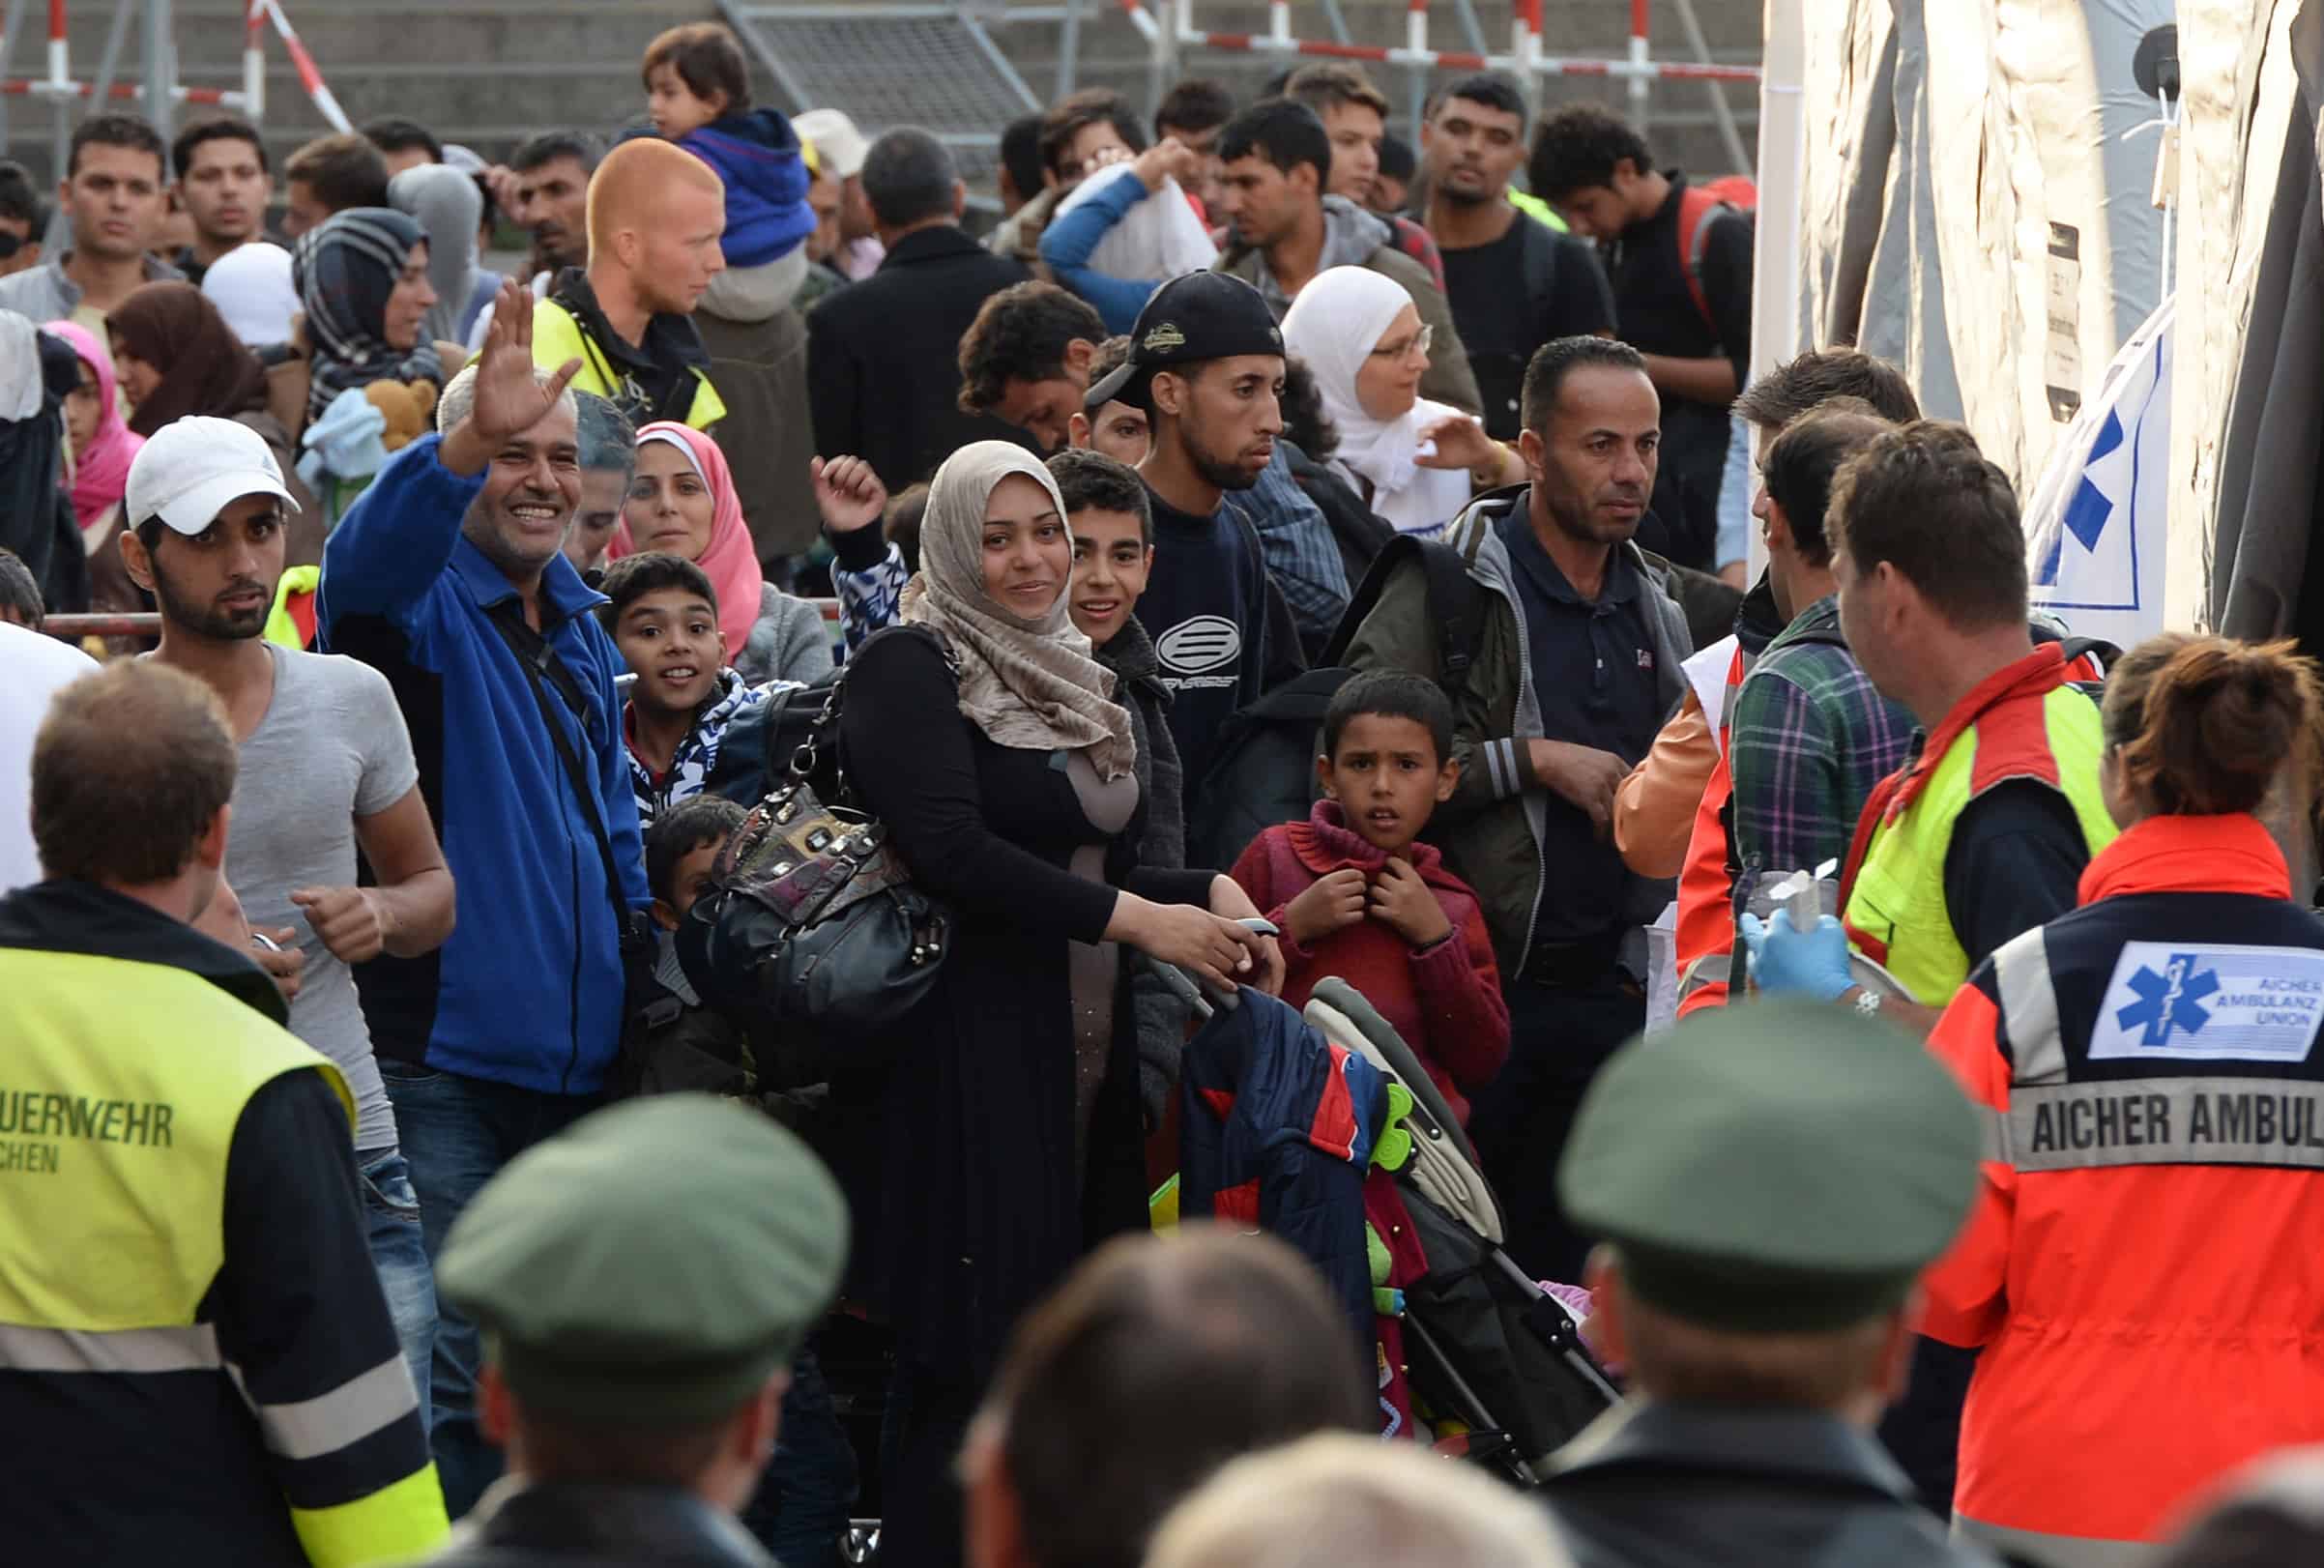 Incoming refugees wait for a short first medical check after their arrival in front of the main train station in Munich, southern Germany, Sept. 5, 2015.